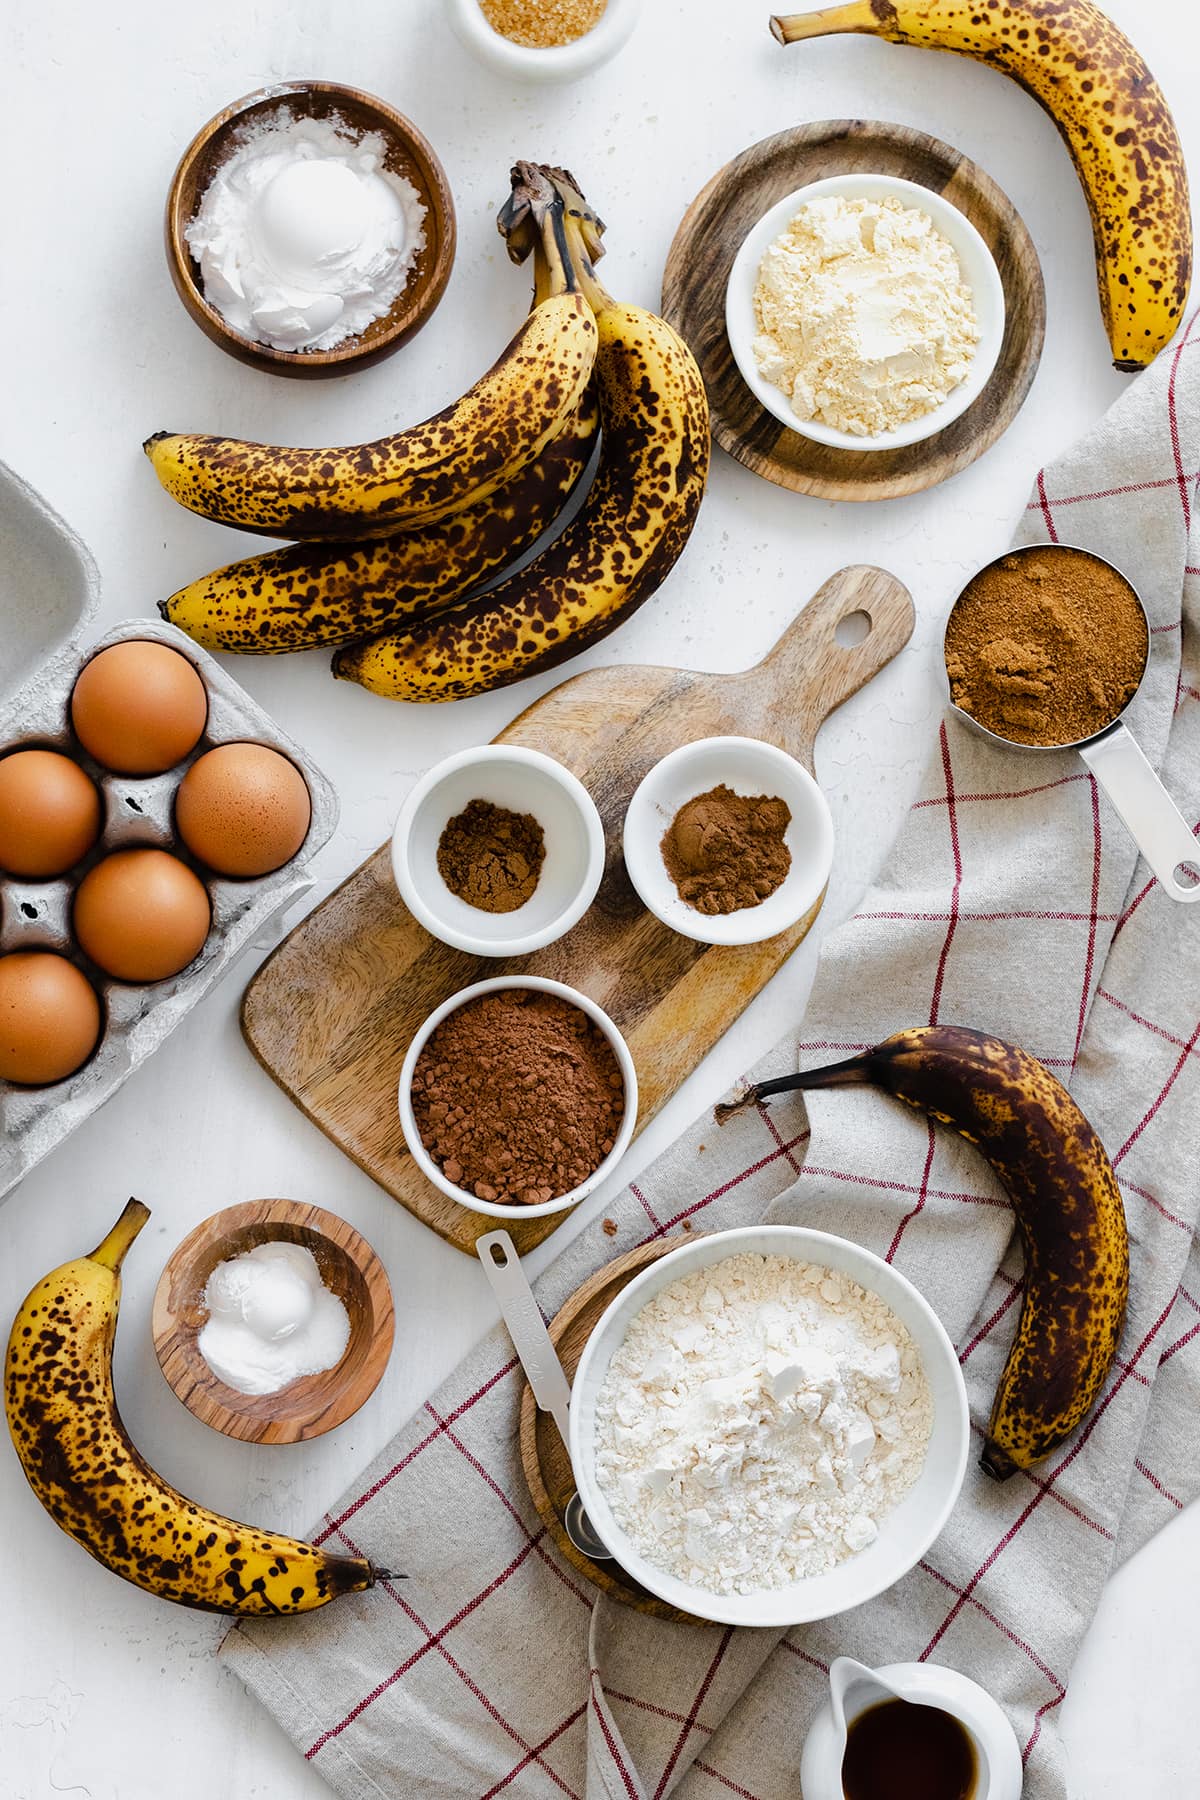 Ingredients for the Caramelized Chocolate Banana Bread laid out on a white table